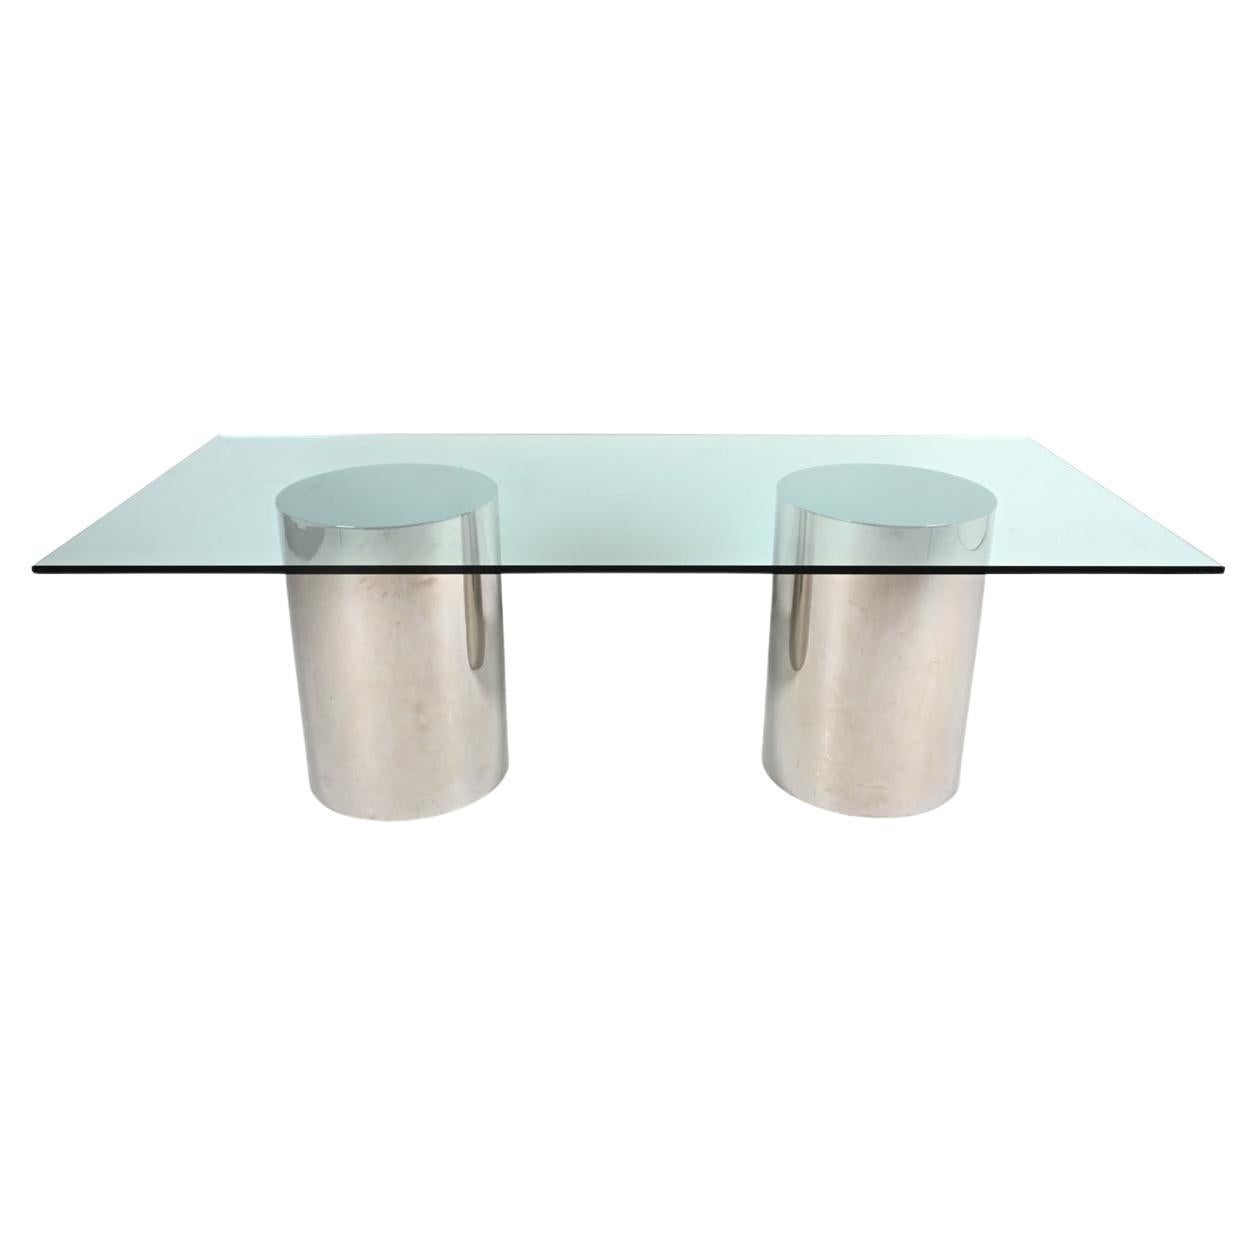 Brueton "DT Drum" Dining Table in Polished Steel & Tempered Glass, c. 1970's For Sale